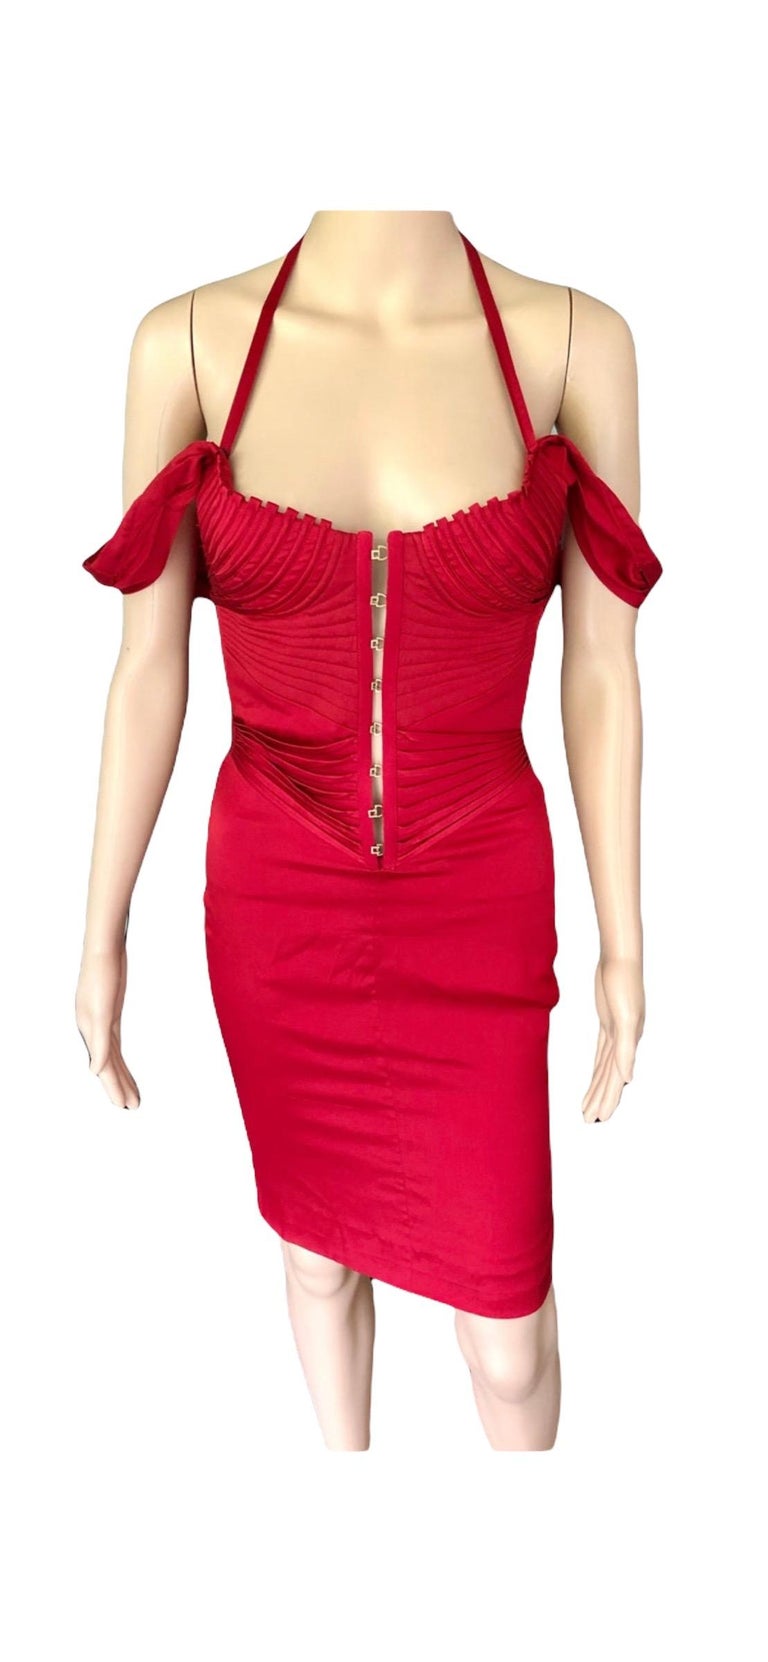 Tom Ford for Gucci F/W 2003 Runway Bustier Corset Silk Red Dress at ...